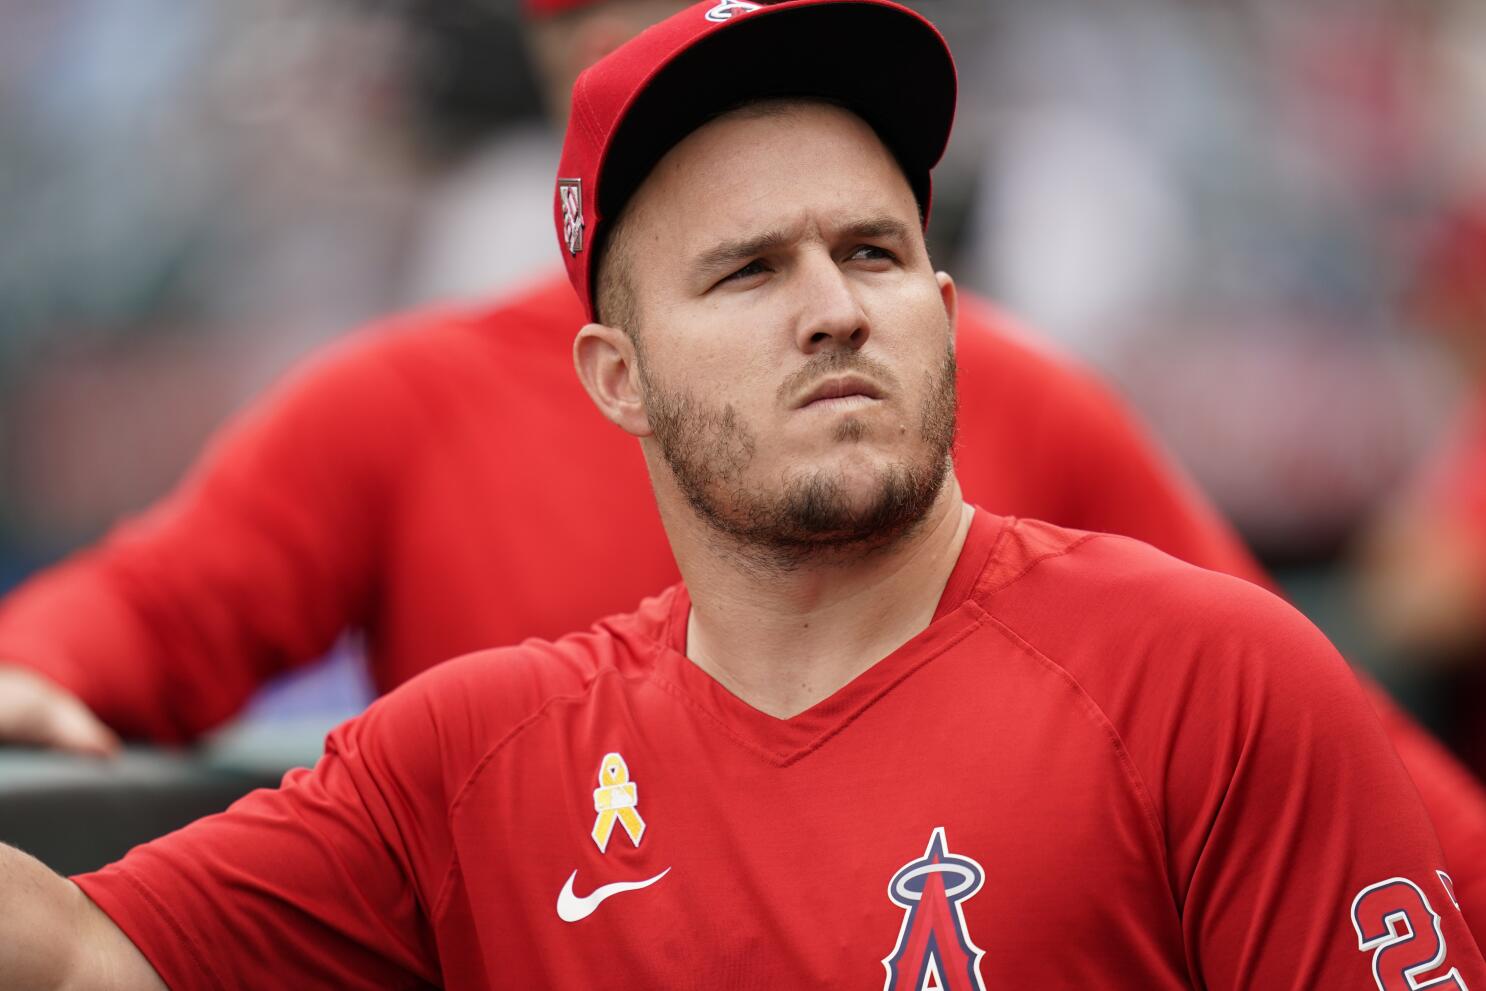 Mike Trout drives in all 3 runs as Team USA advances - Stream the